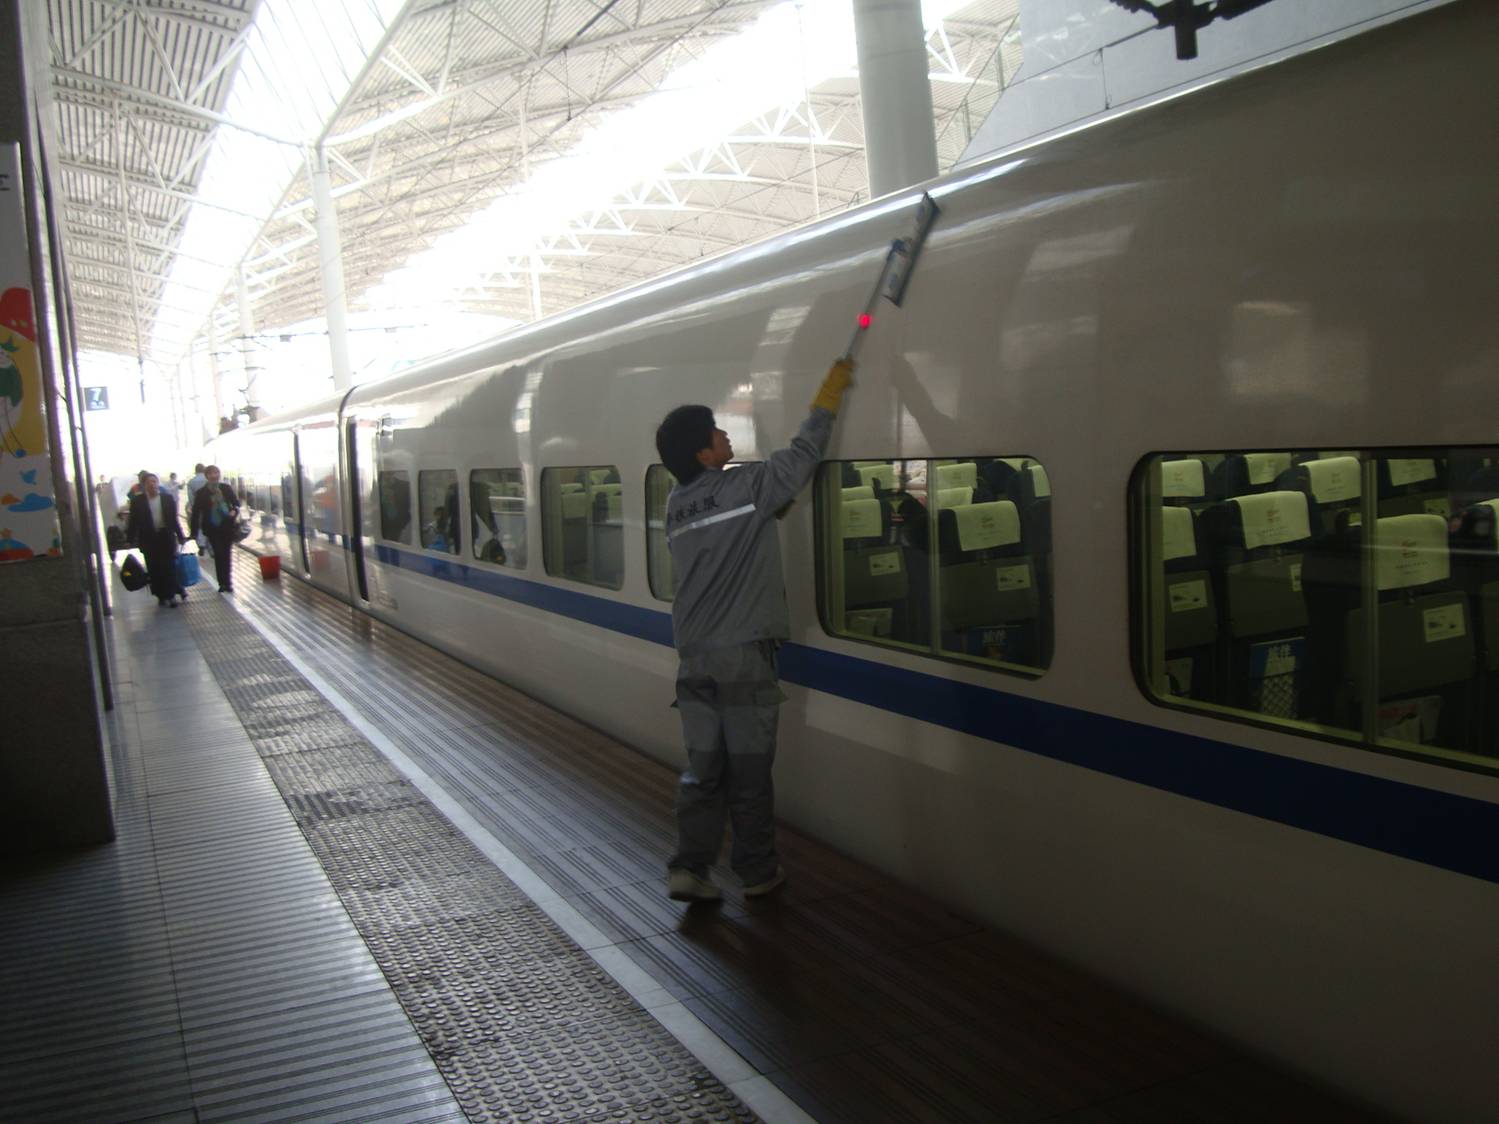 Picture: The new G train has a team of cleaners working on it when it gets to Shanghai.